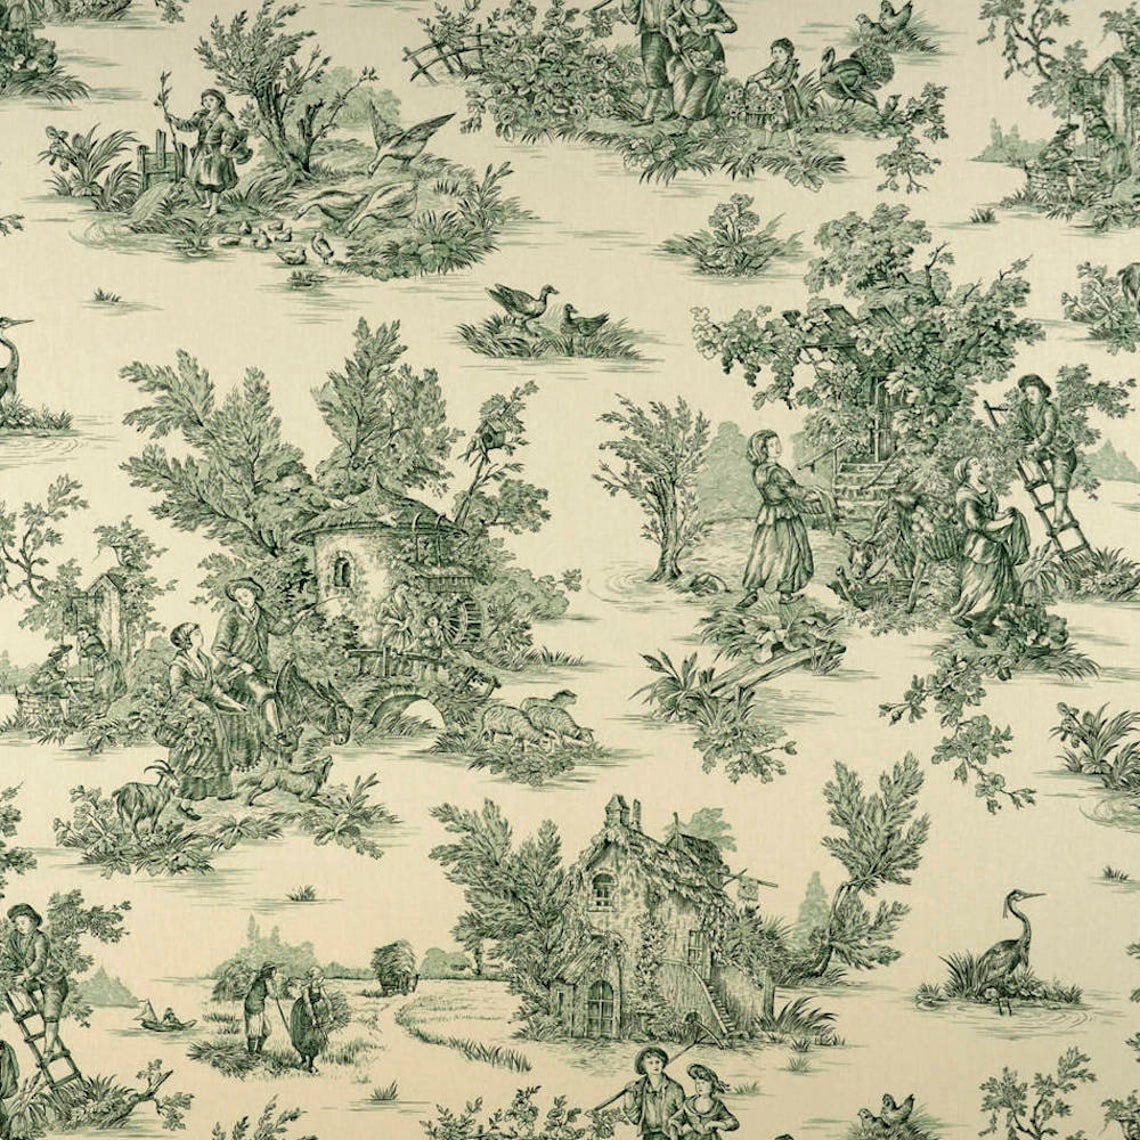 pillow sham in pastorale #3 green on cream french country toile